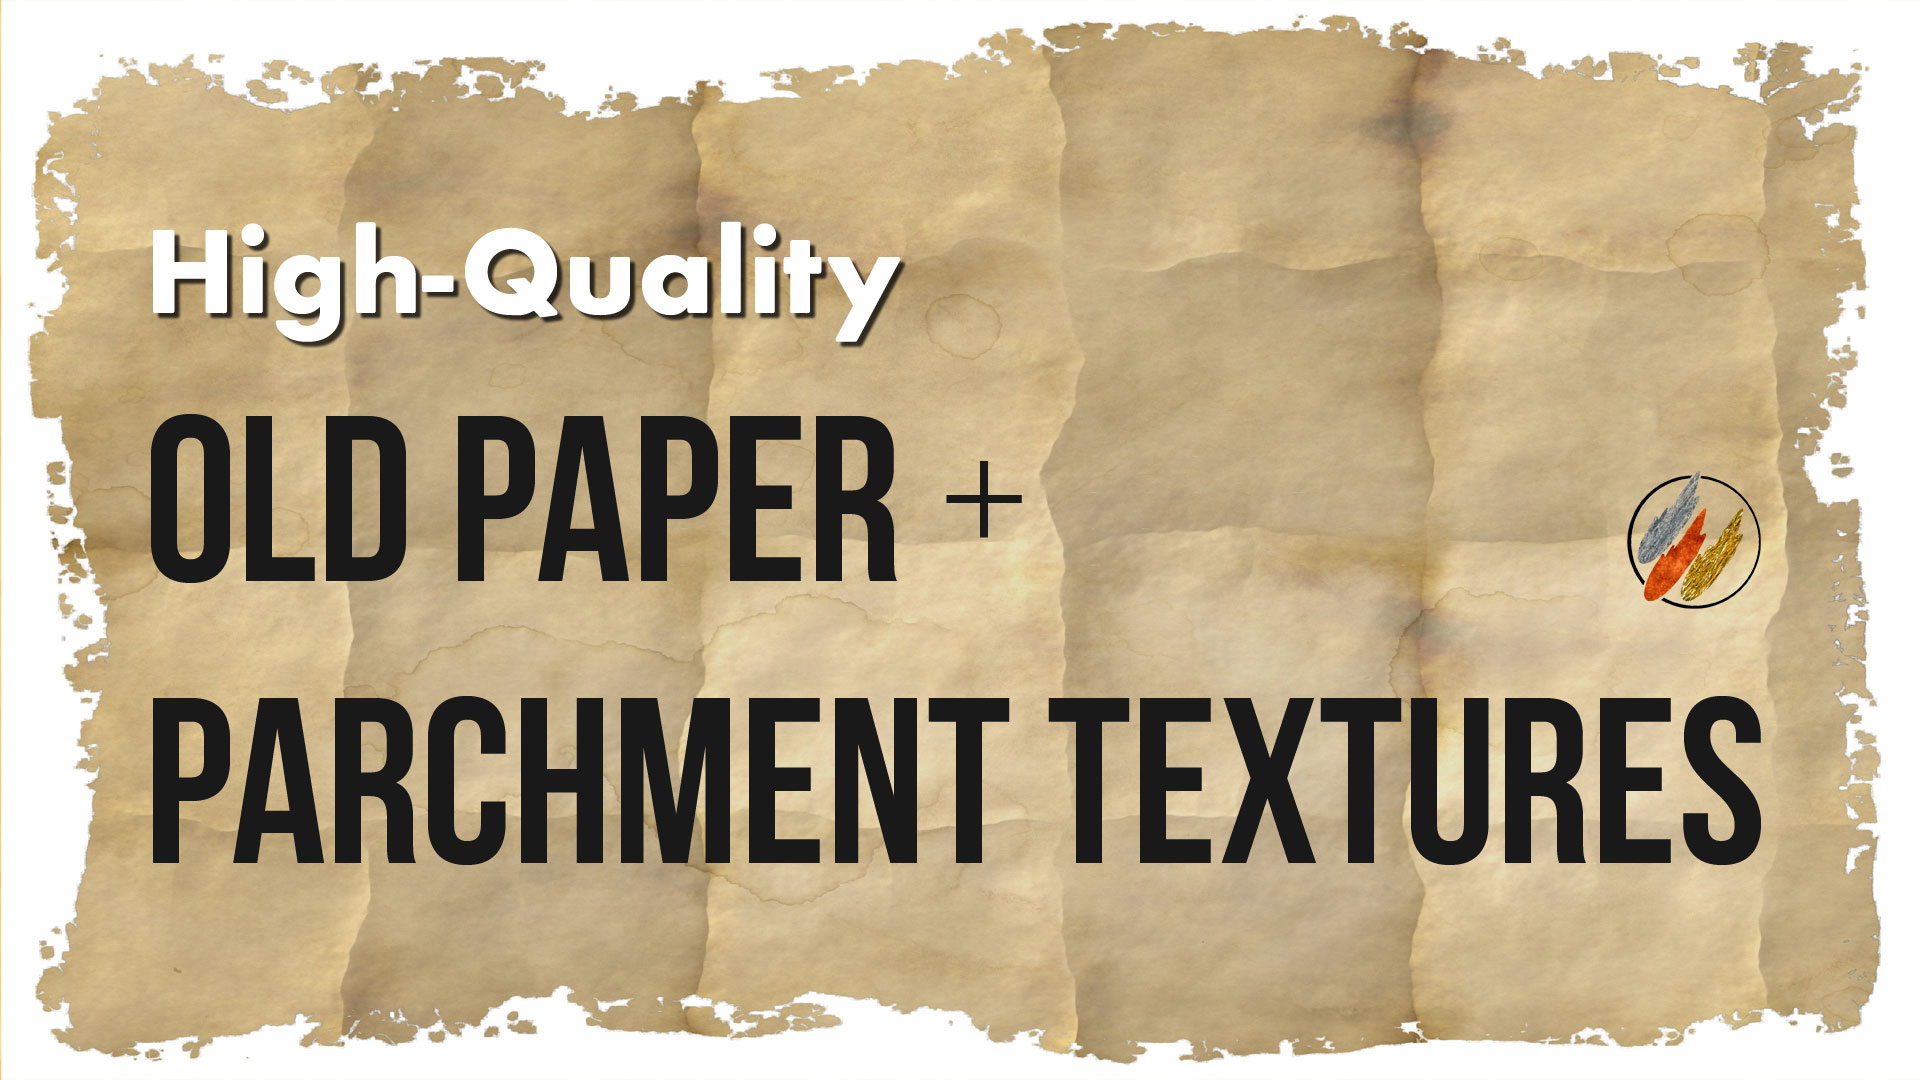 An old and worn out parchment paper background texture